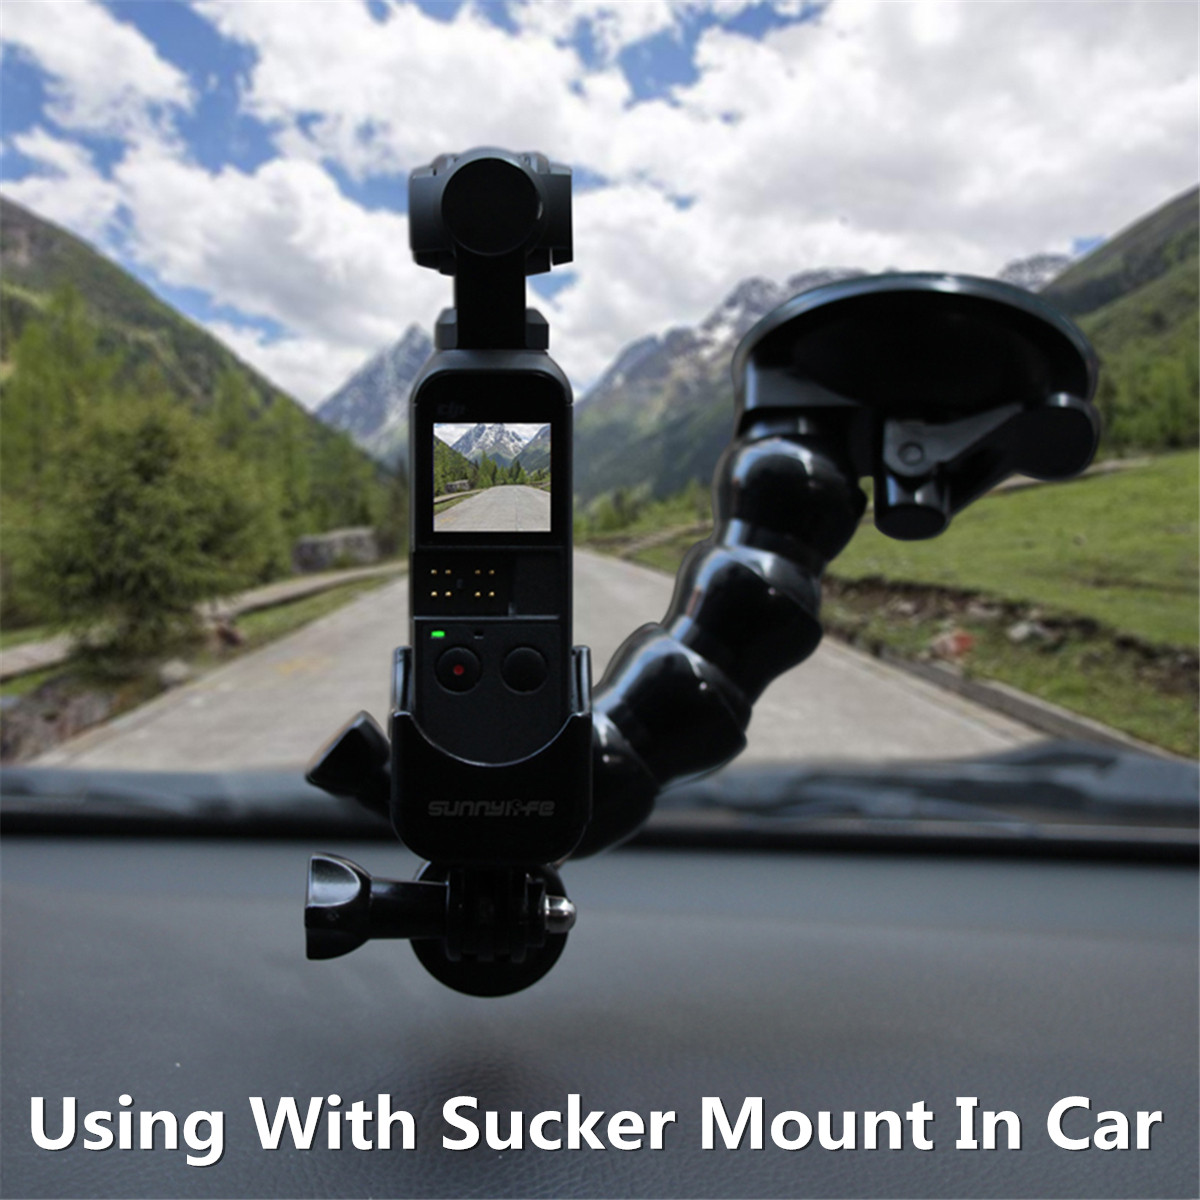 Hooshion Mount Bracket for Car Sucker for DJI Osmo Pocket,Gimbal Extension Module Holder Parts,Vehicle Window Suction Cup Mounting Adapter Converter 